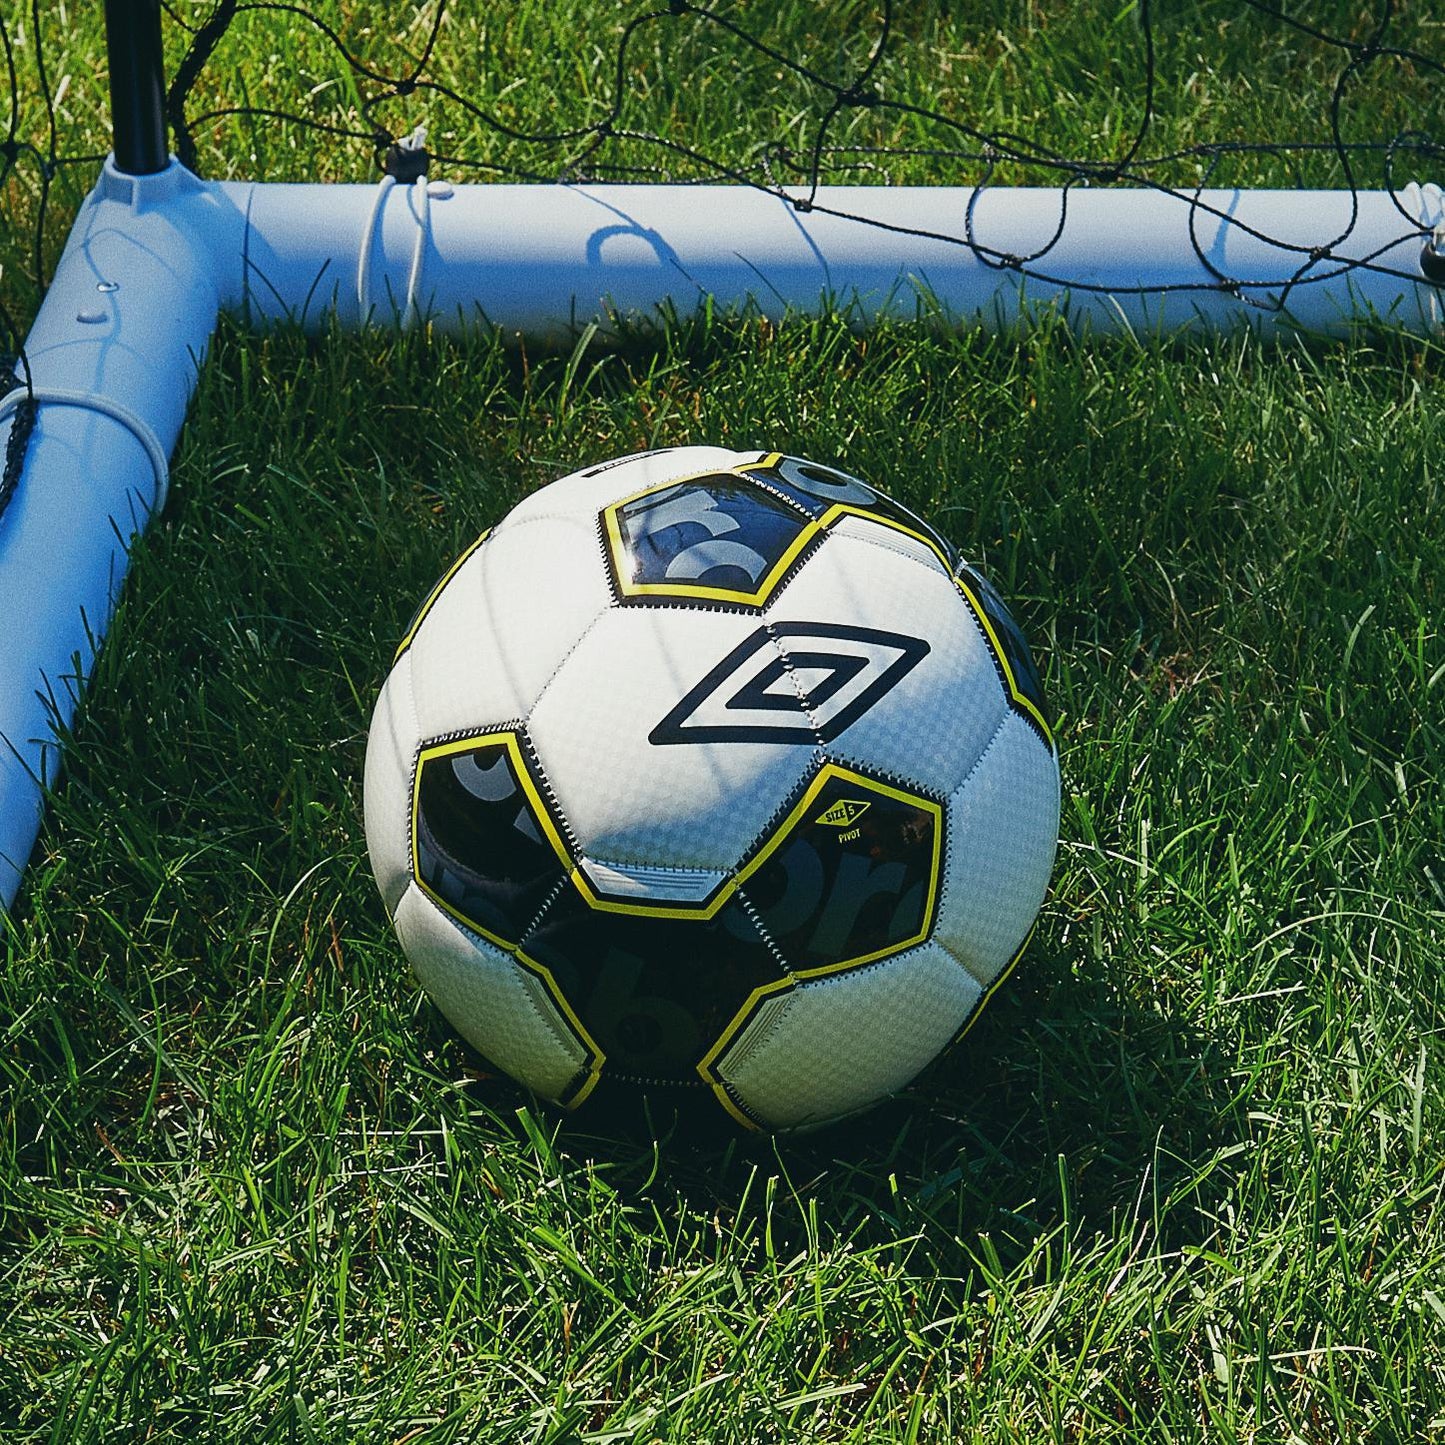 Umbro Pivot Soccer Ball for Training, Recreation, Practice, High Performance, Classic with Sizes 4,5 for Different Ages